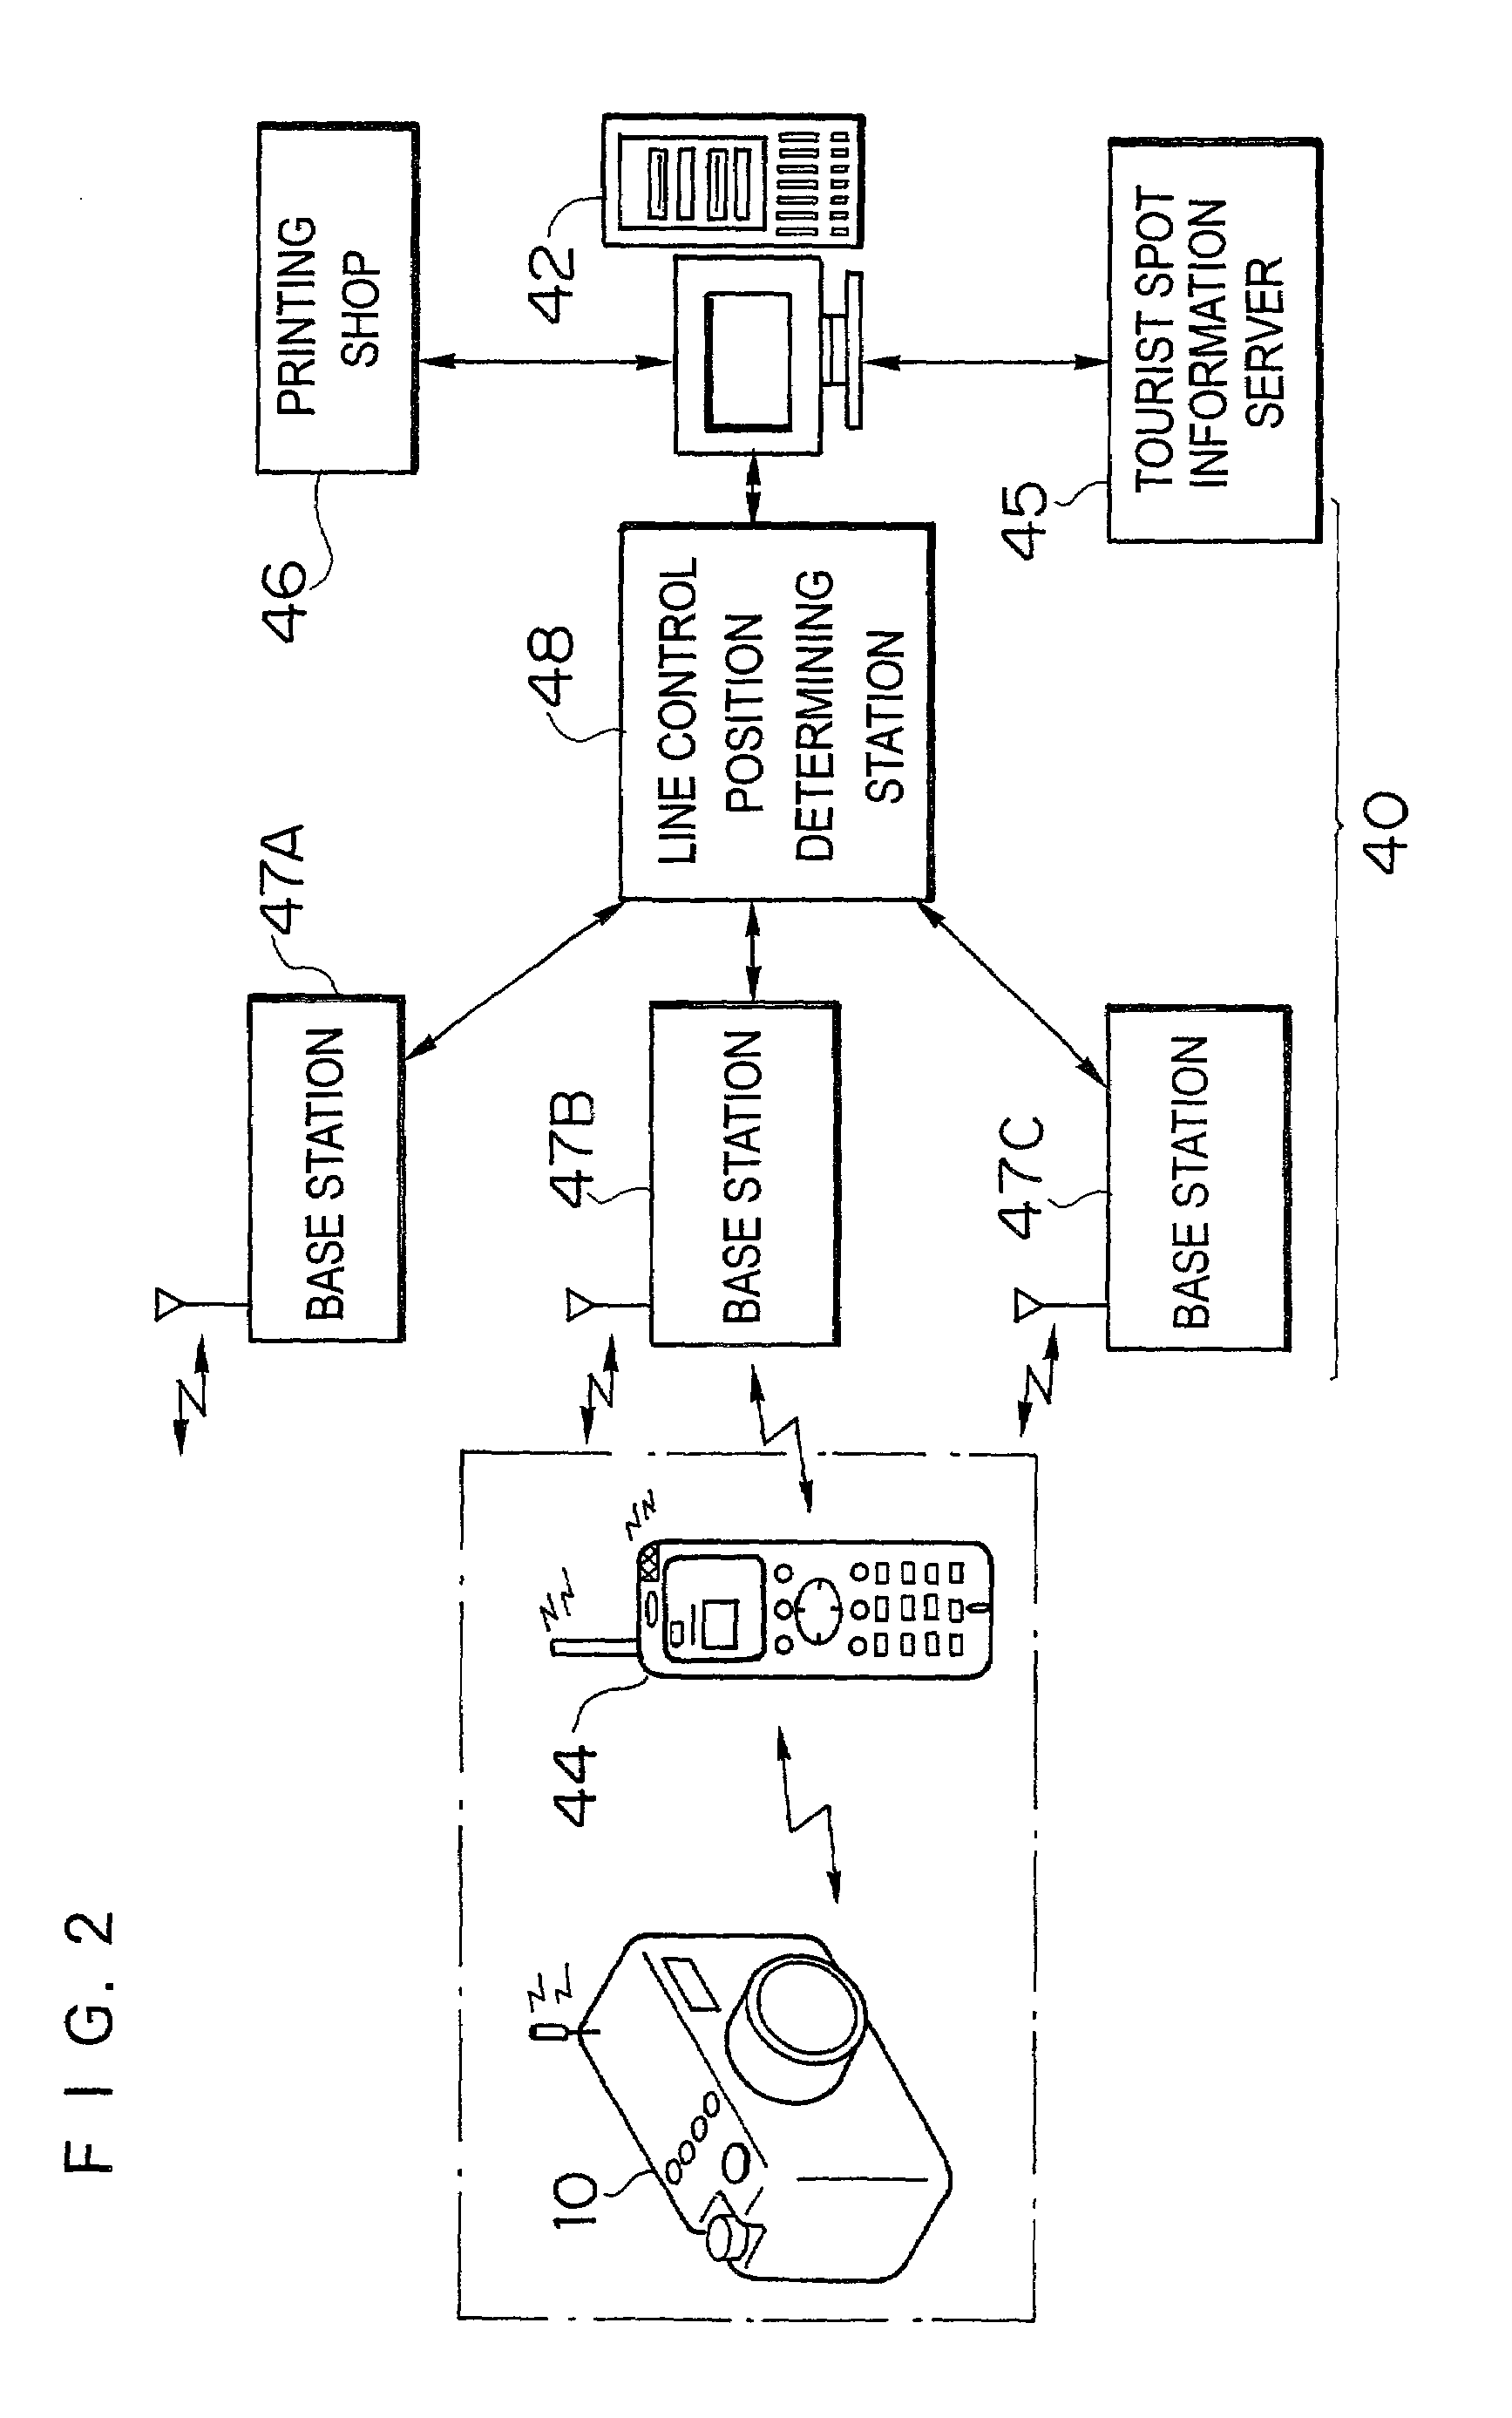 Electronic camera, information obtaining system and print order system